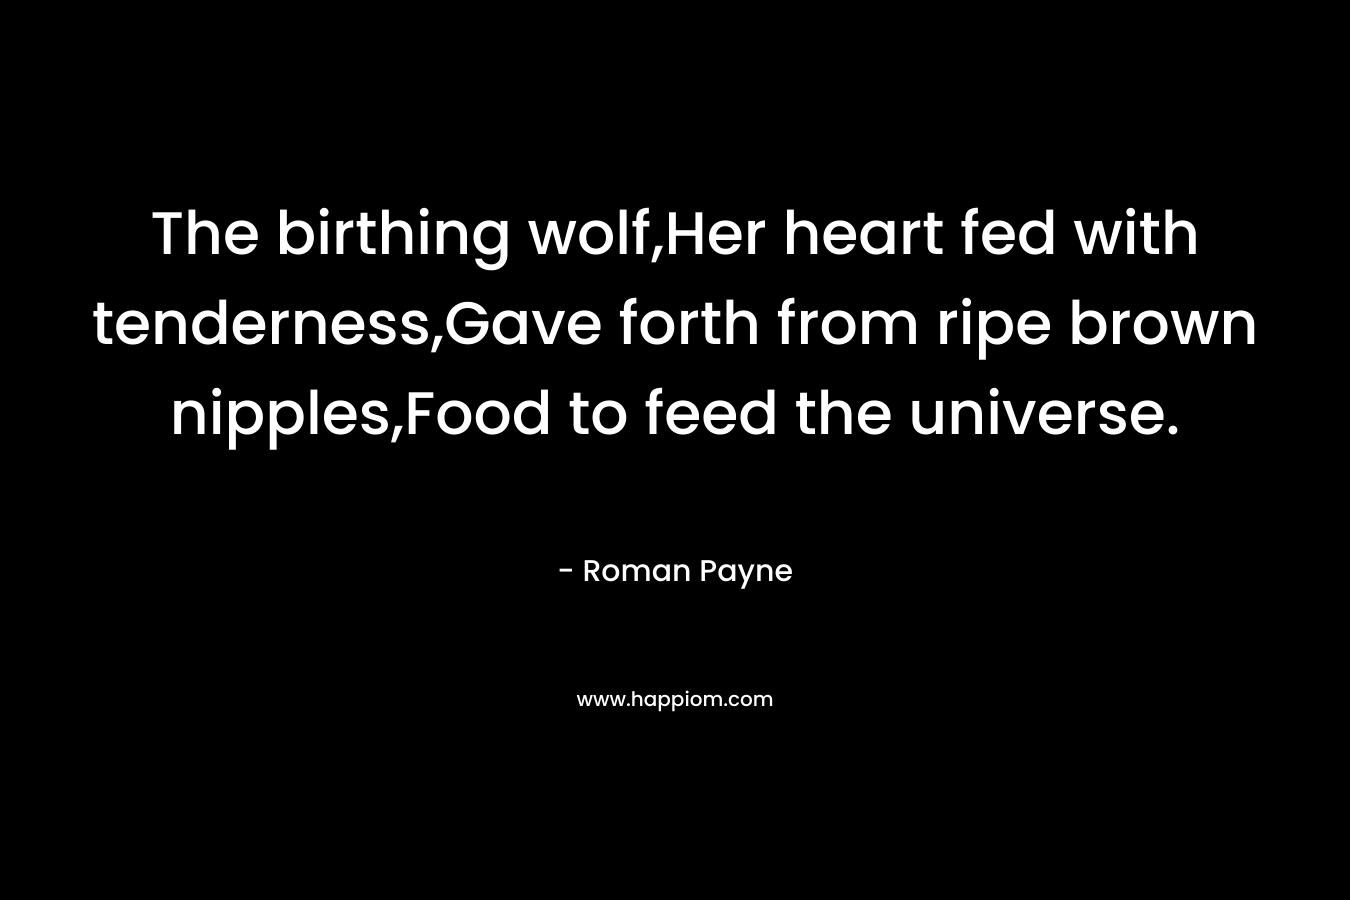 The birthing wolf,Her heart fed with tenderness,Gave forth from ripe brown nipples,Food to feed the universe.